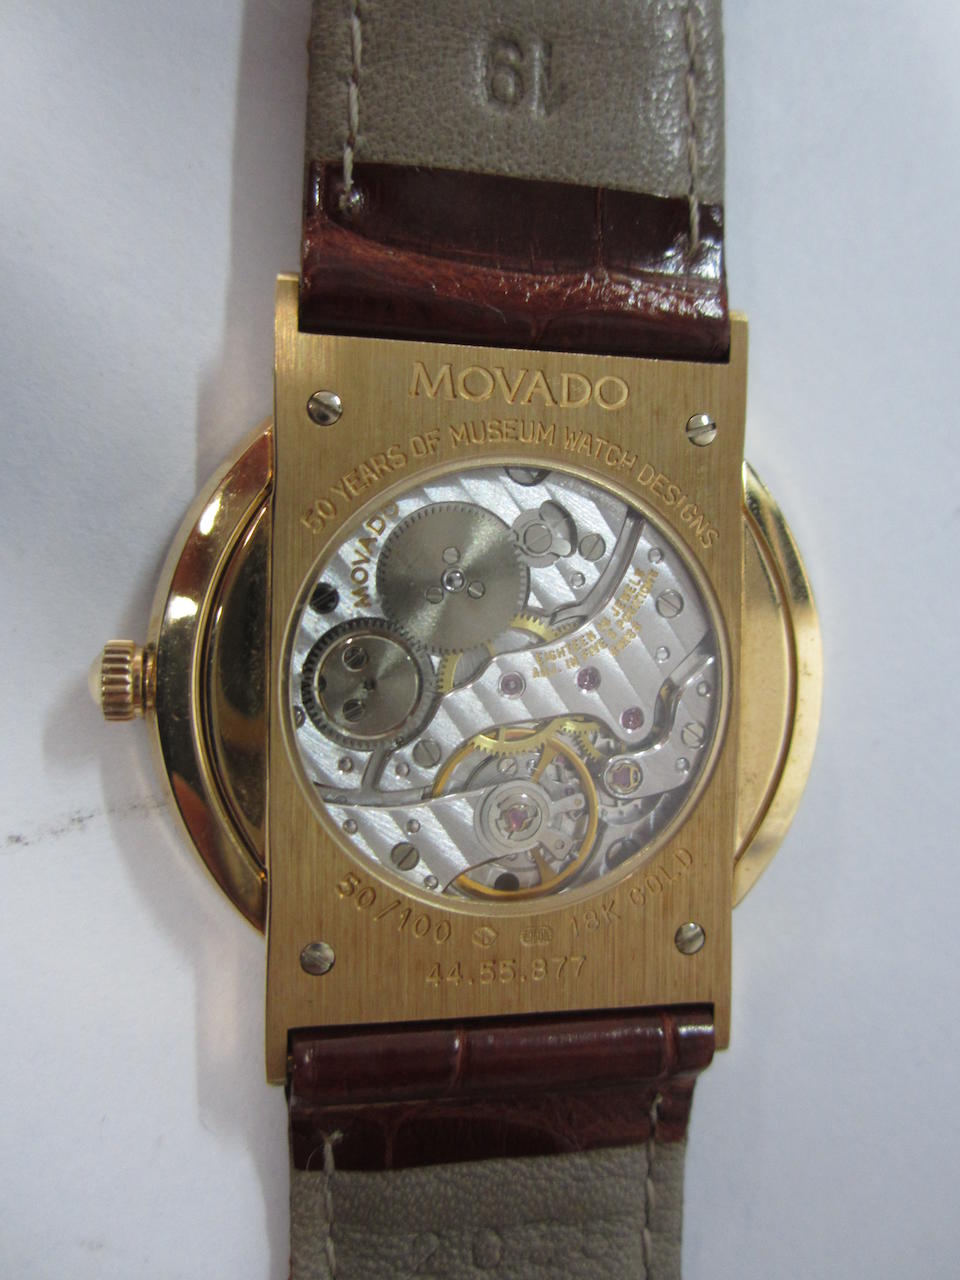 Movado. An 18K rose gold and ceramic manual wind wristwatch 50 years of Museum Watch Design, Ref:44.55.877, No.50/100, Sold 16th December 2005